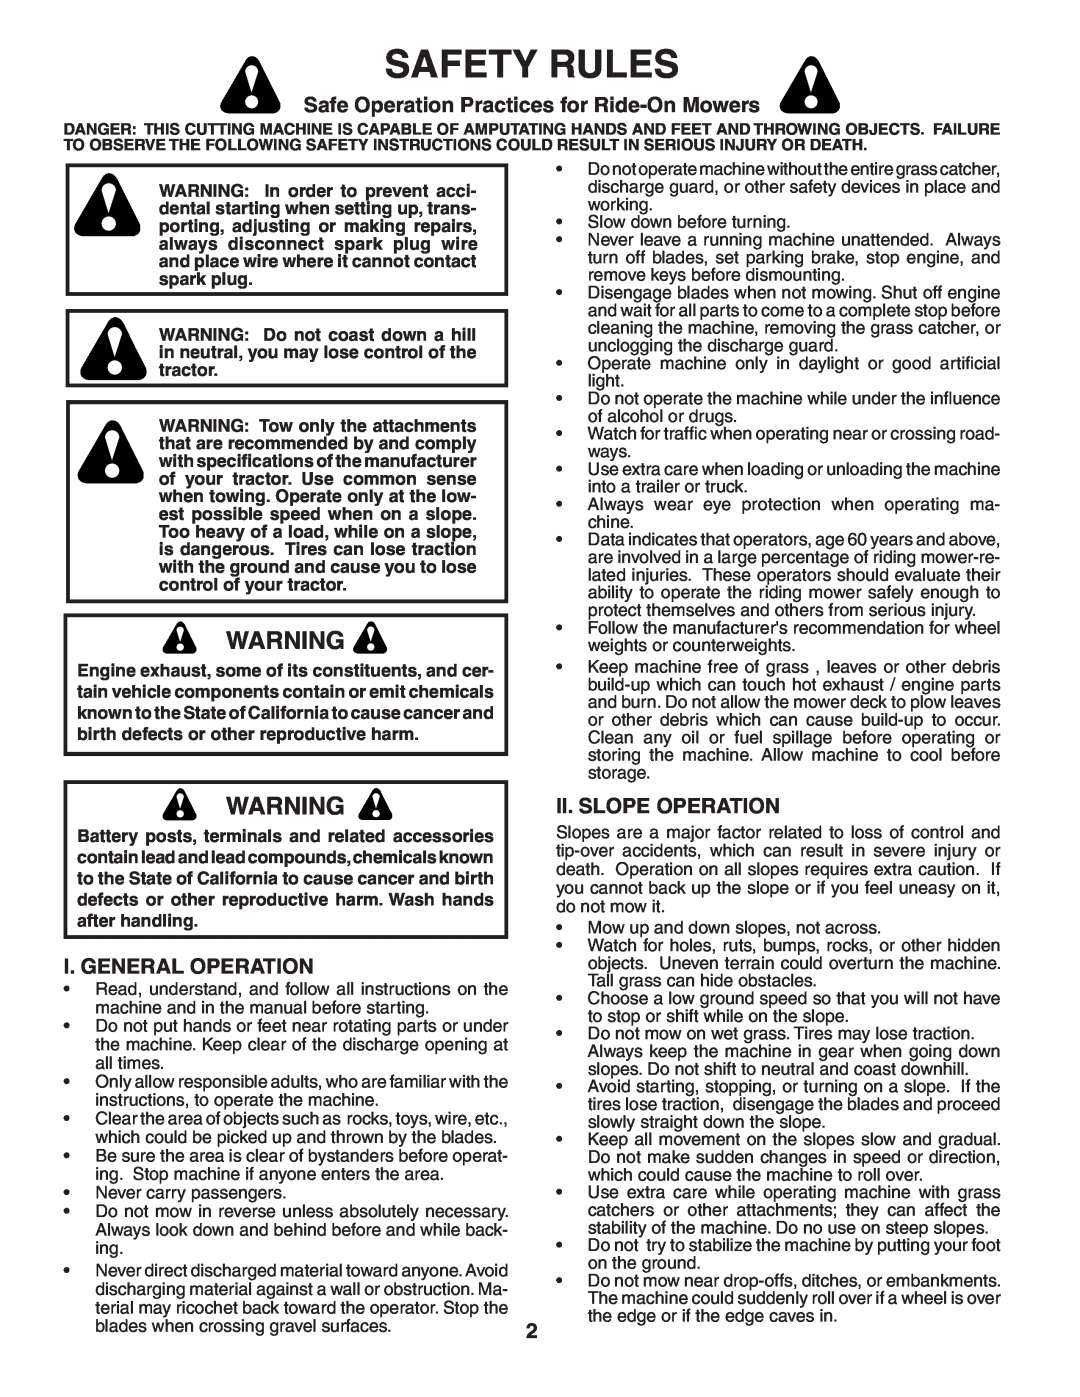 Poulan 403315 manual Safety Rules, Safe Operation Practices for Ride-OnMowers, I. General Operation, Ii. Slope Operation 